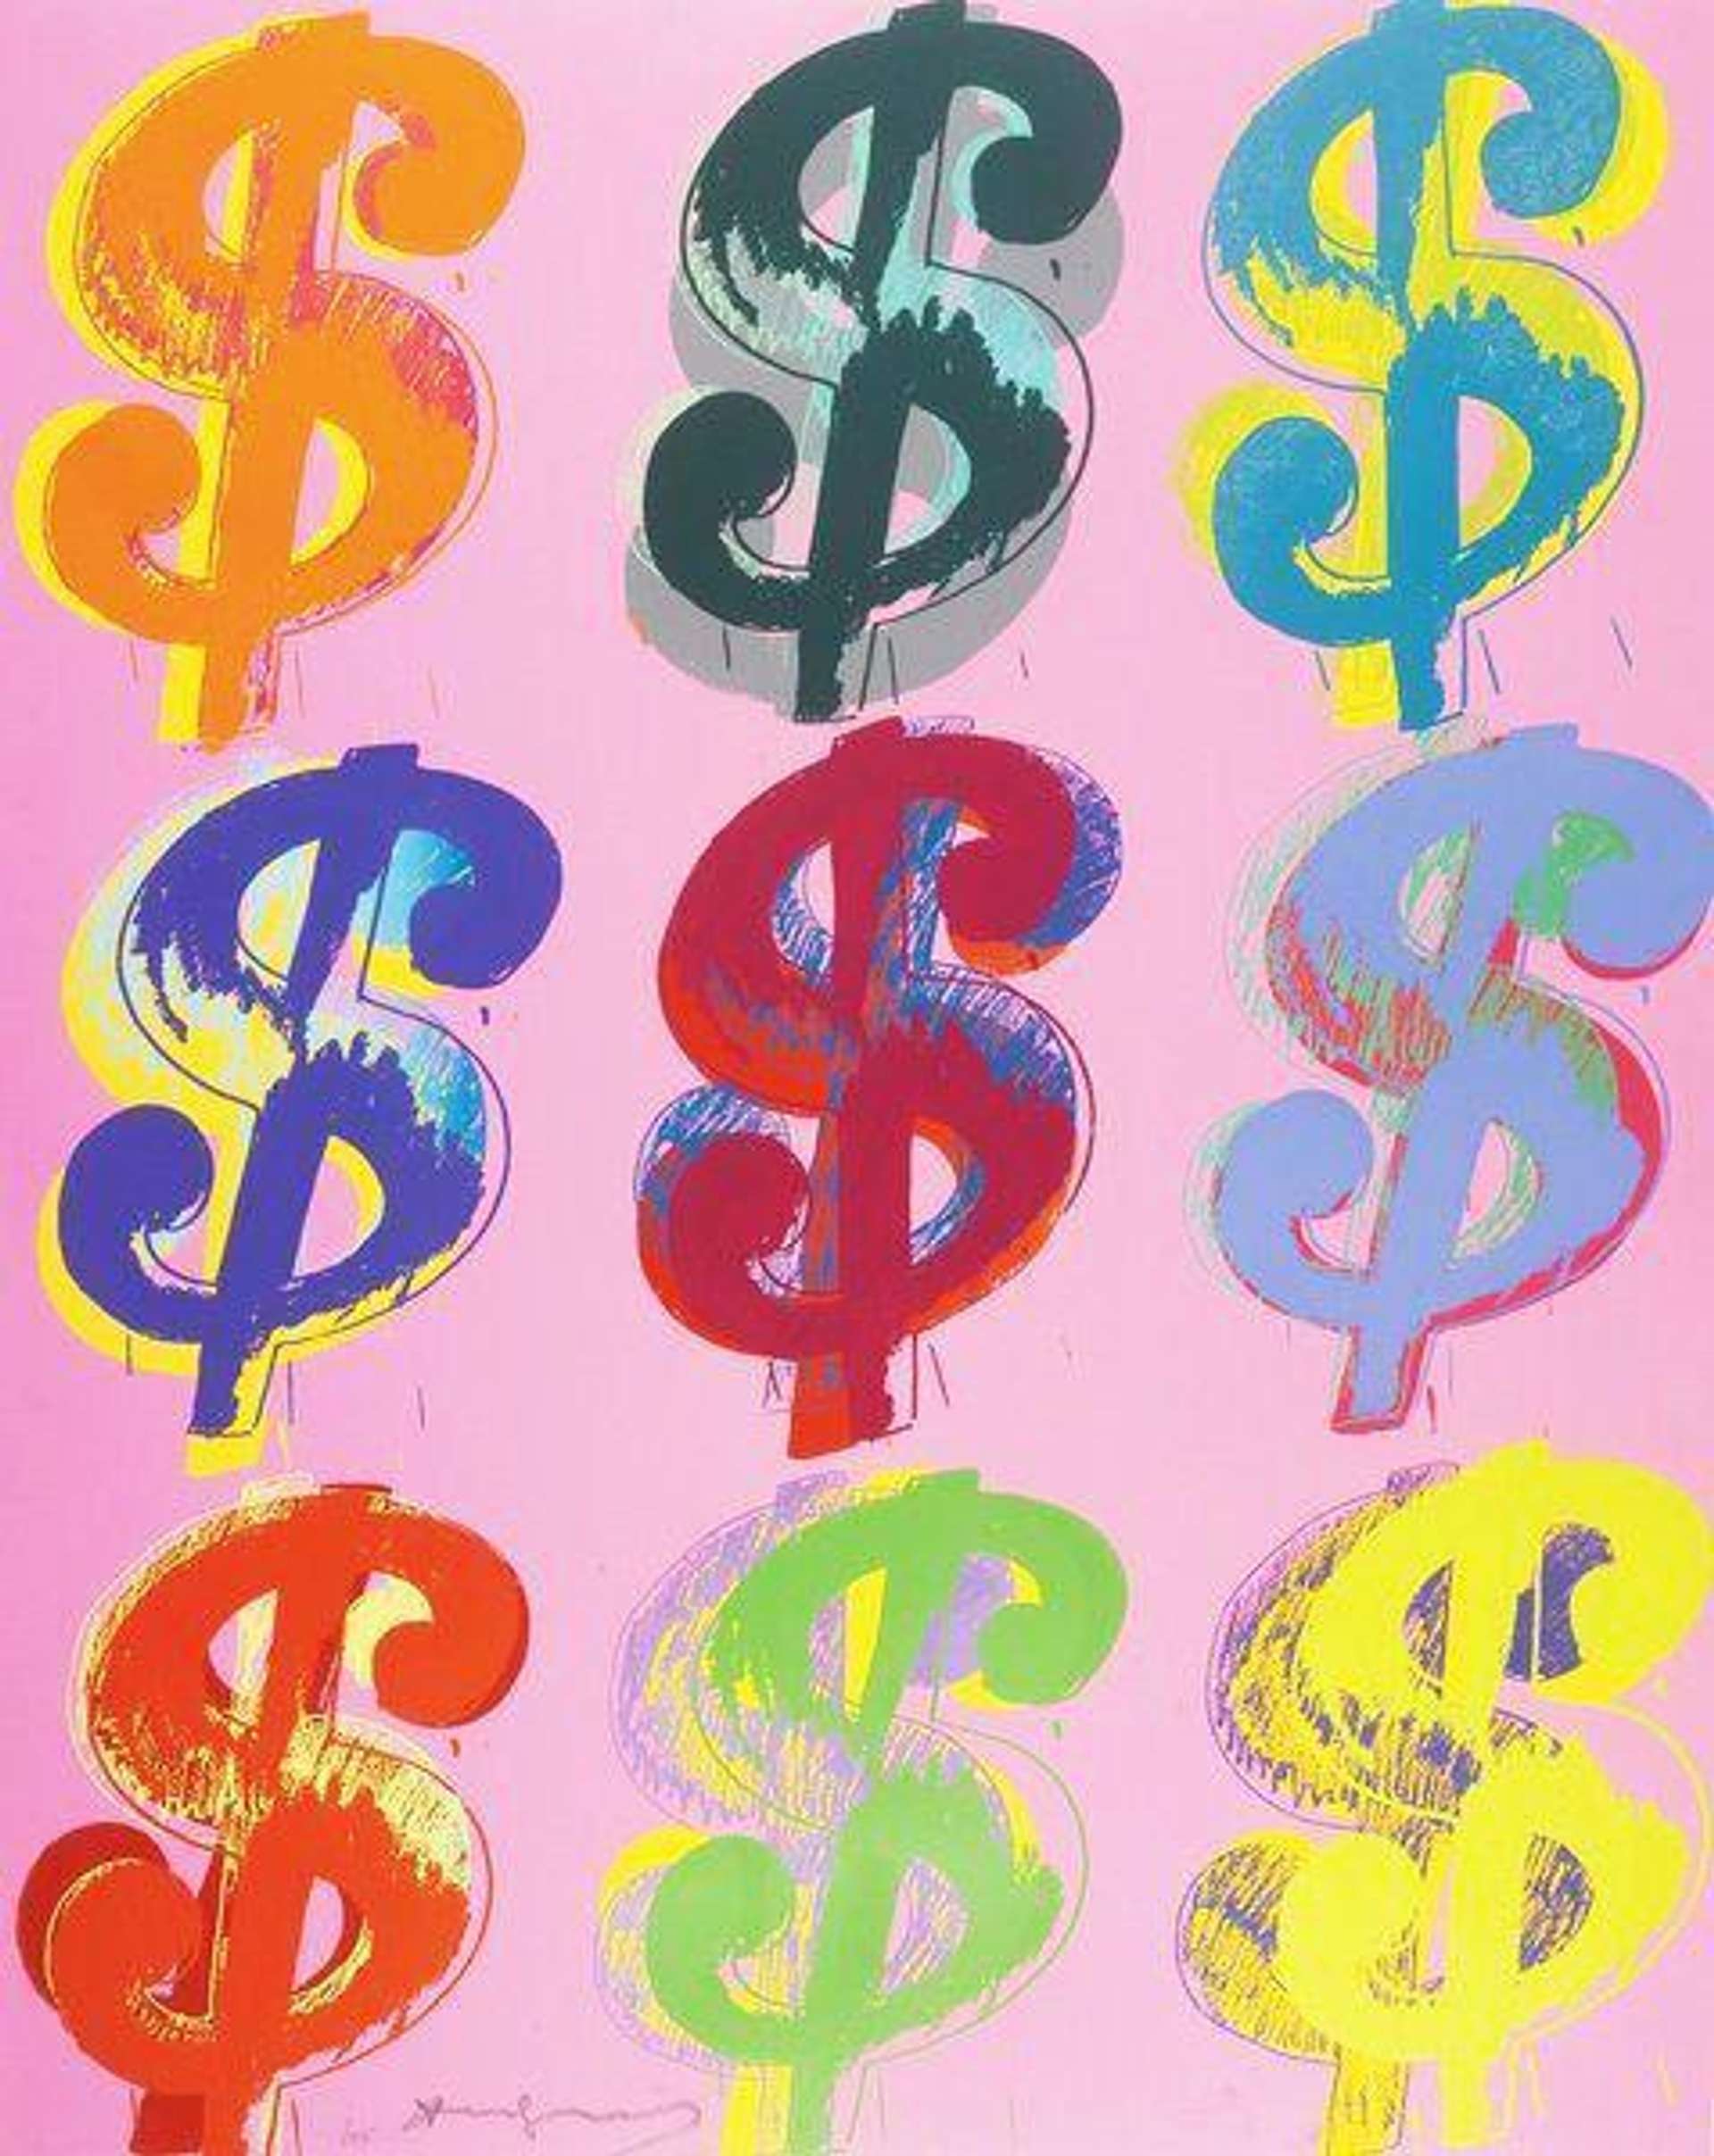 Nine multi-coloured dollar signs in a 3x3 grid on a pink backdrop.